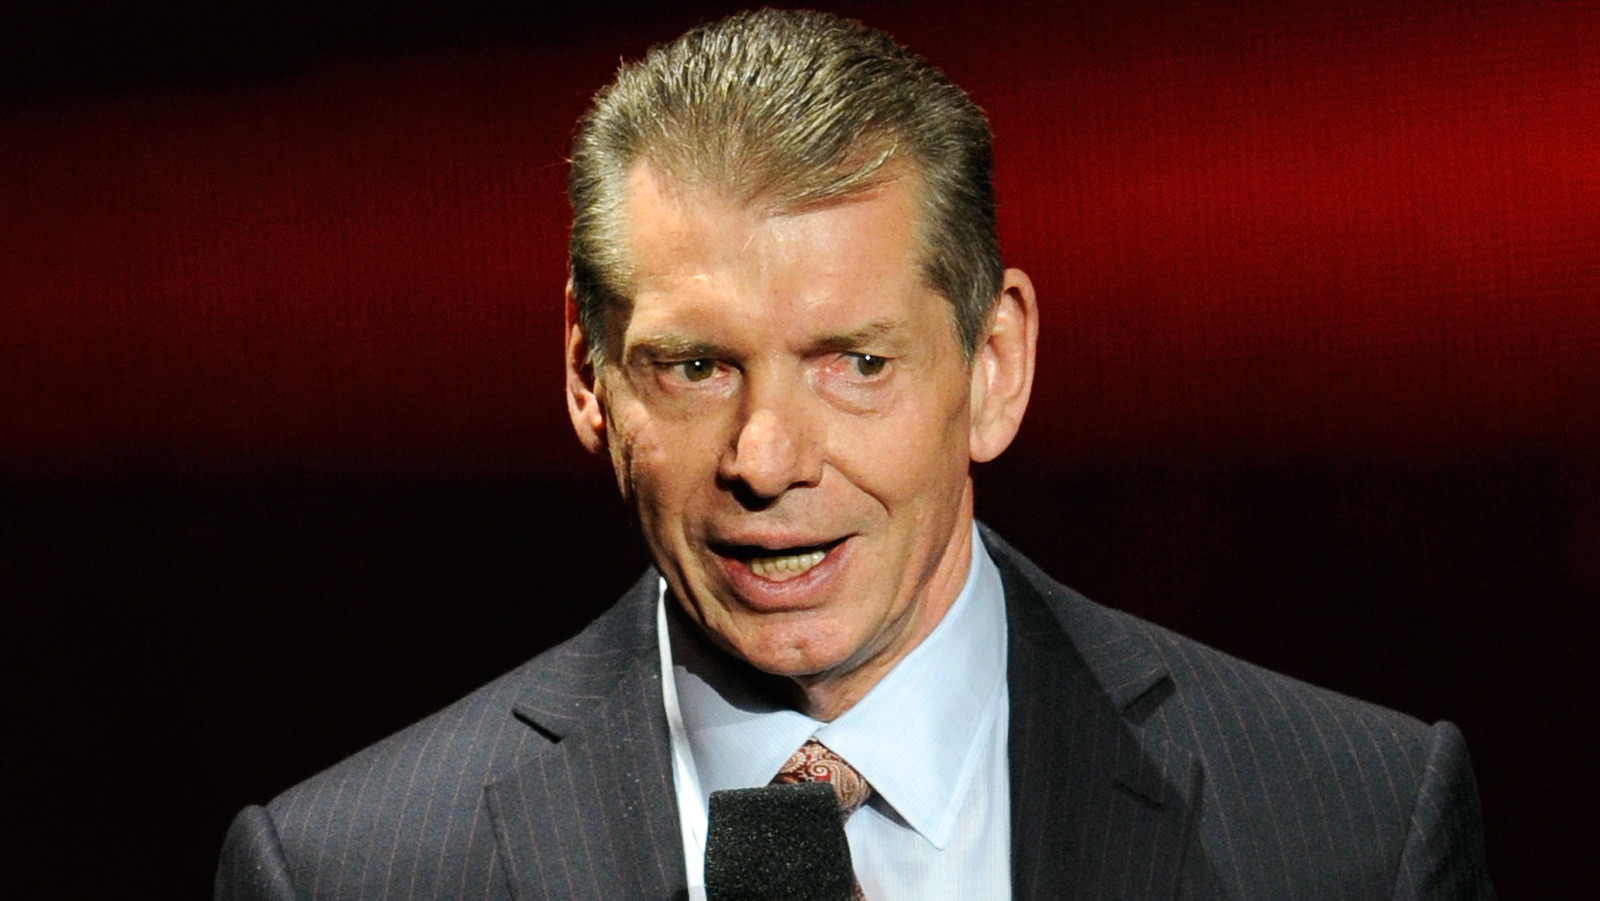 Read: Lawyer Representing Plaintiff In WWE, Vince McMahon Lawsuit Releases Statement